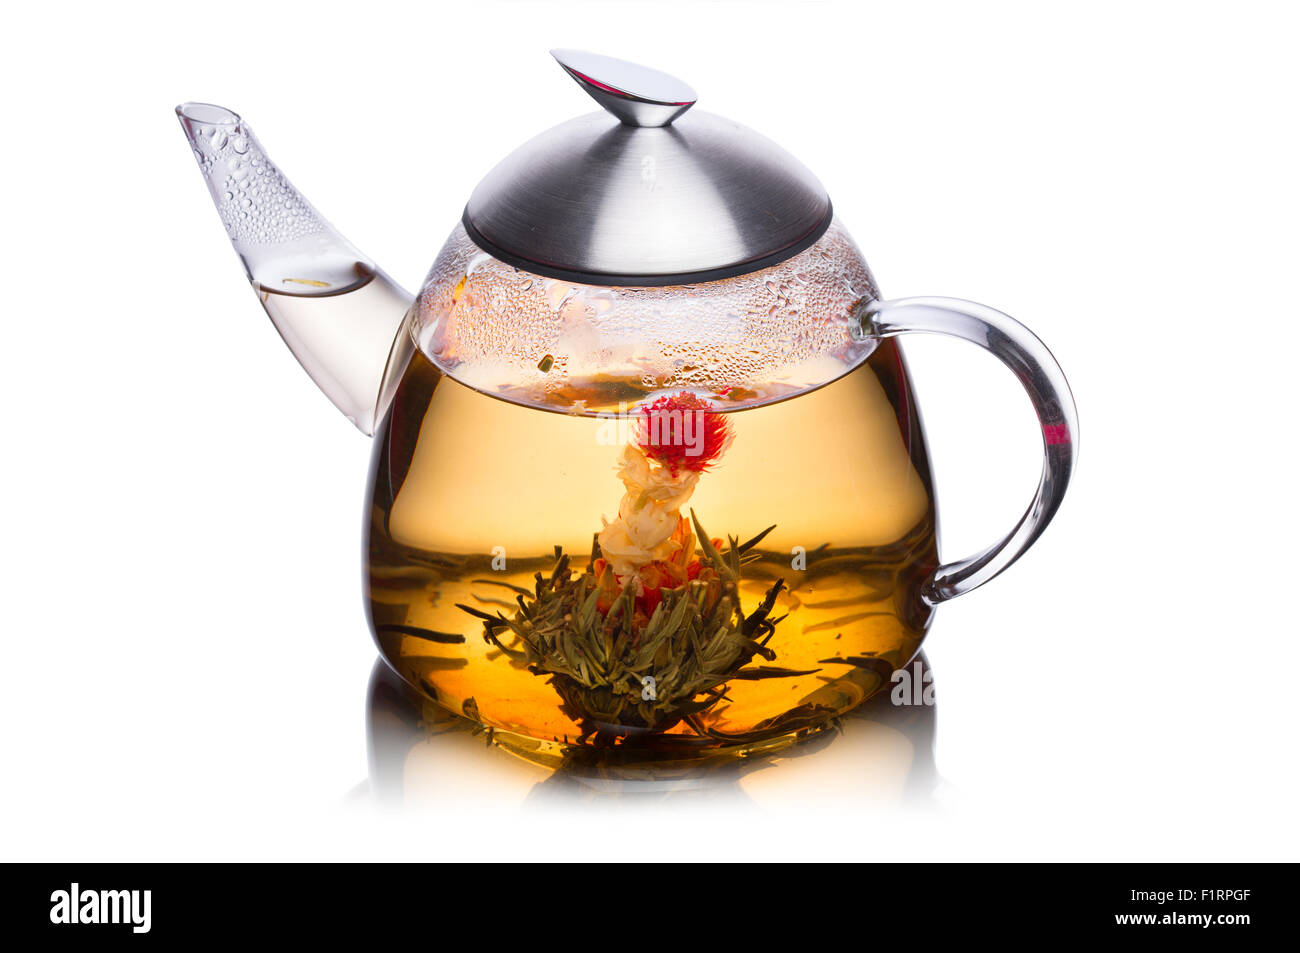 Teacup full of herbal tea with blossoming flower. Healthy eating. Sun tea Stock Photo